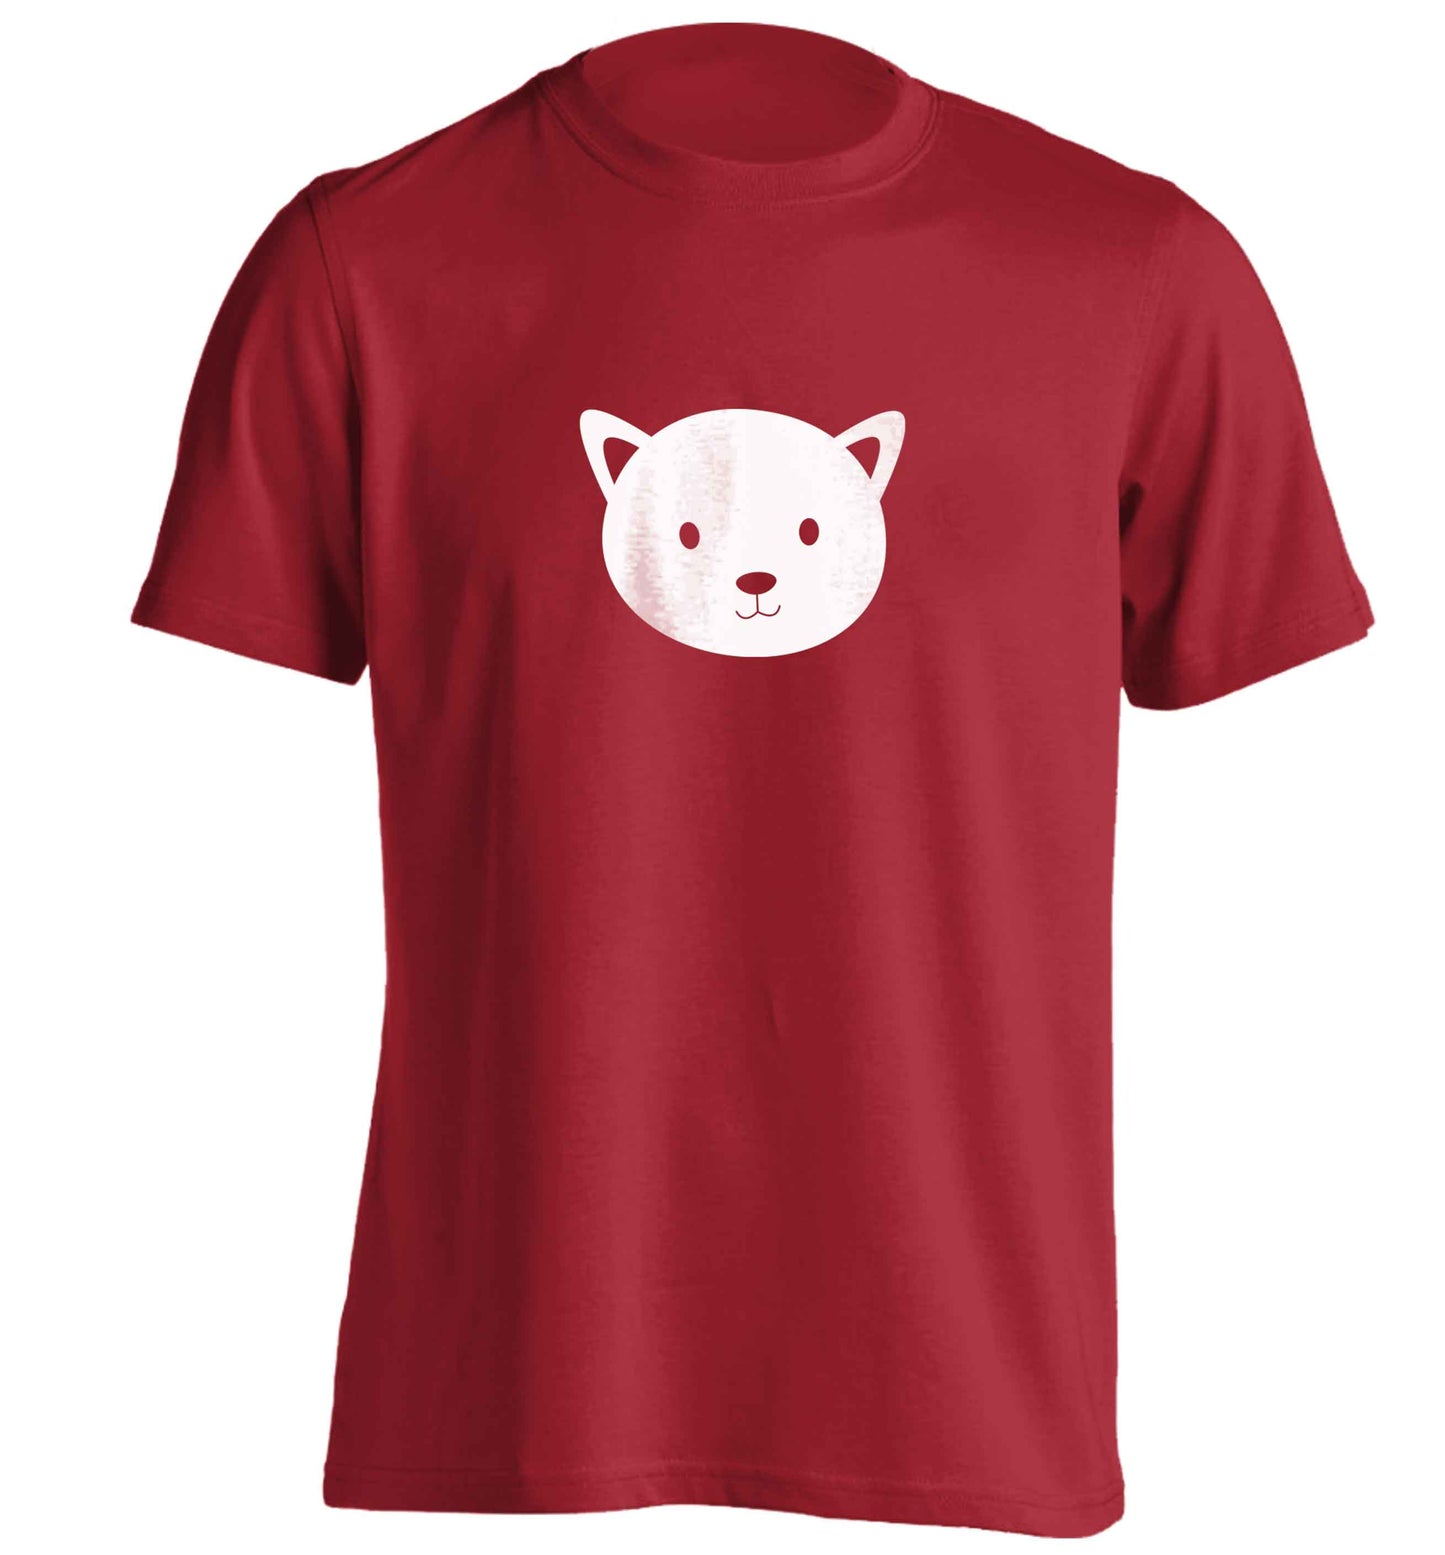 Cat face only Kit adults unisex red Tshirt 2XL